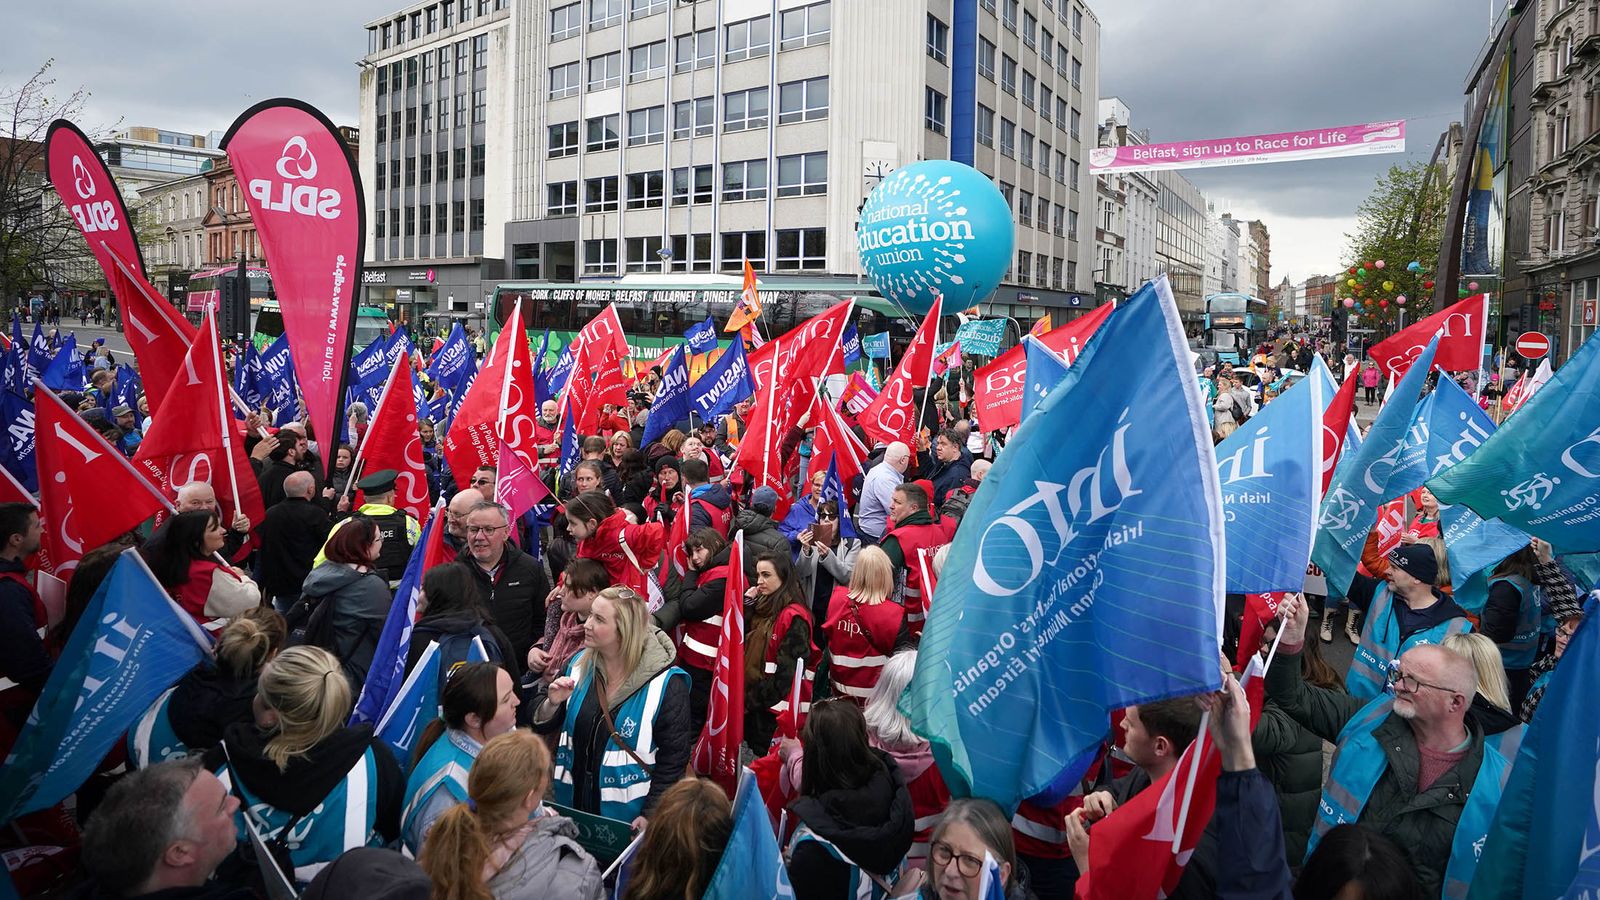 Northern Ireland grinds to halt amid massive strike action – what's going on?